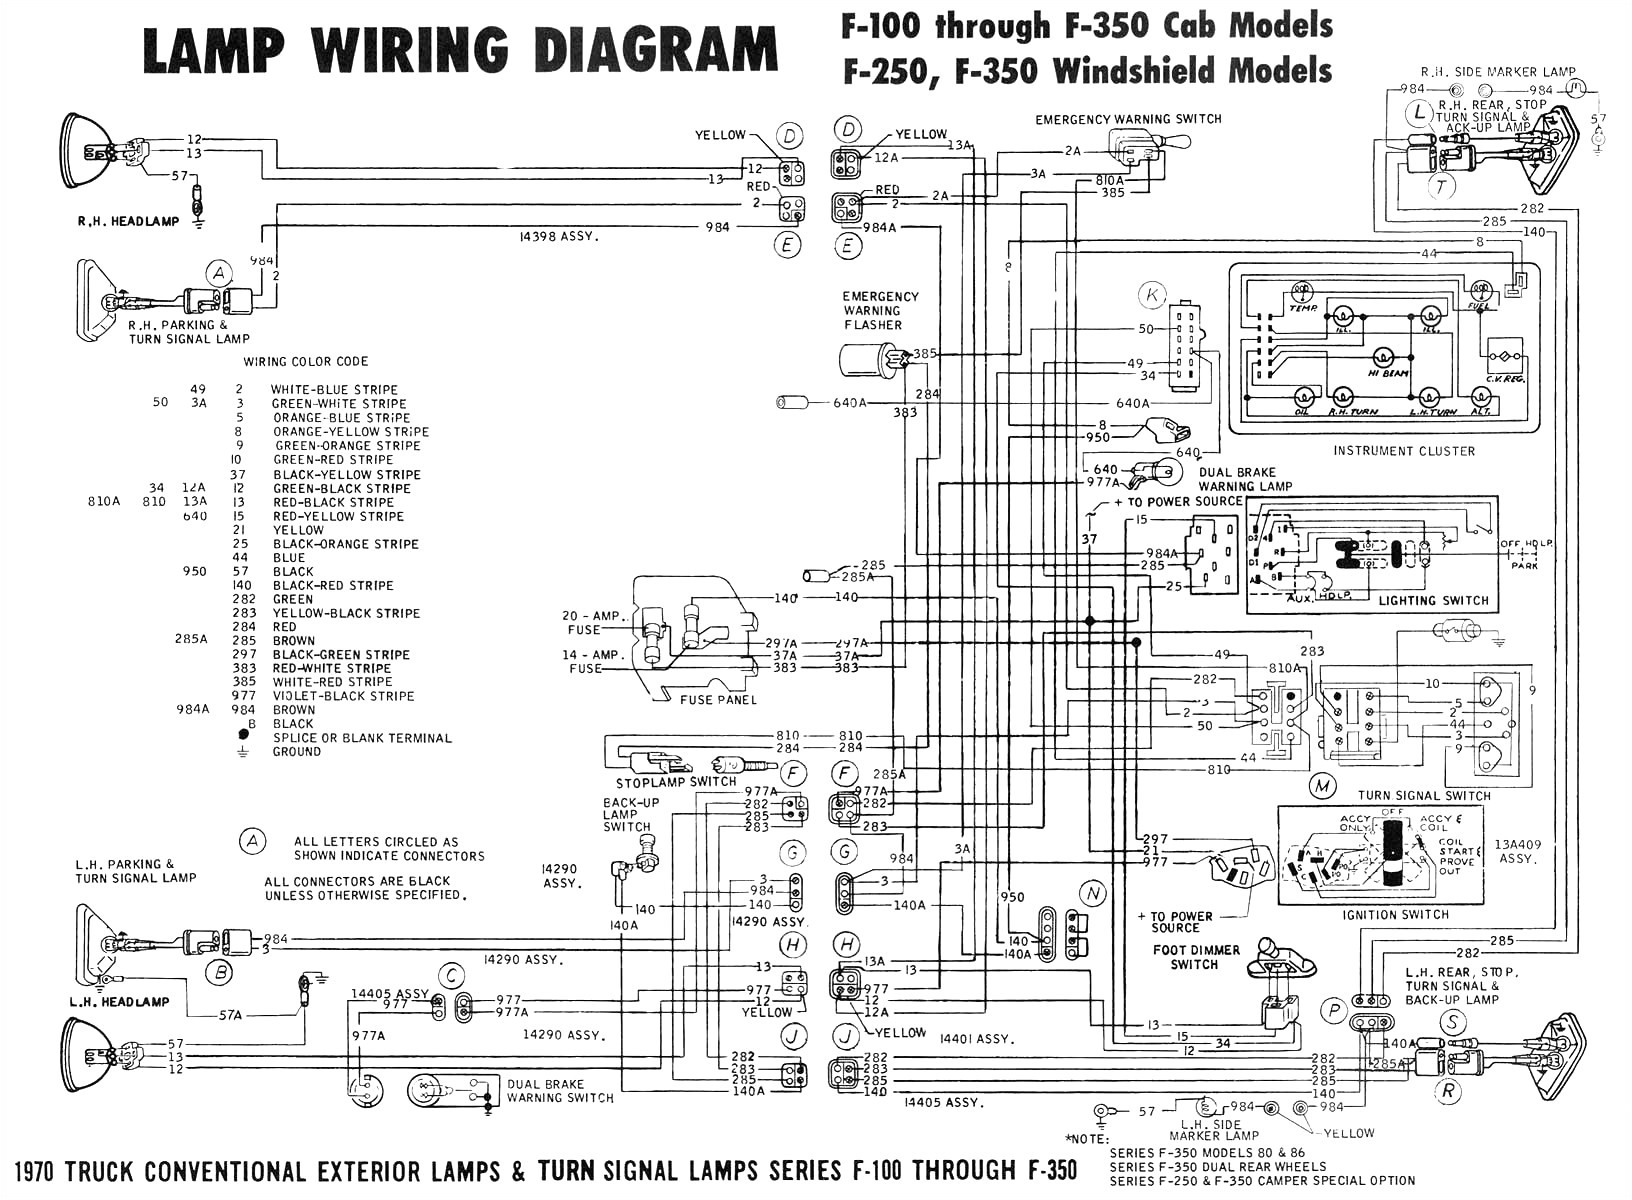 1994 ford ranger engine diagrams autos post wiring diagram view ford f150 front suspension diagram autos